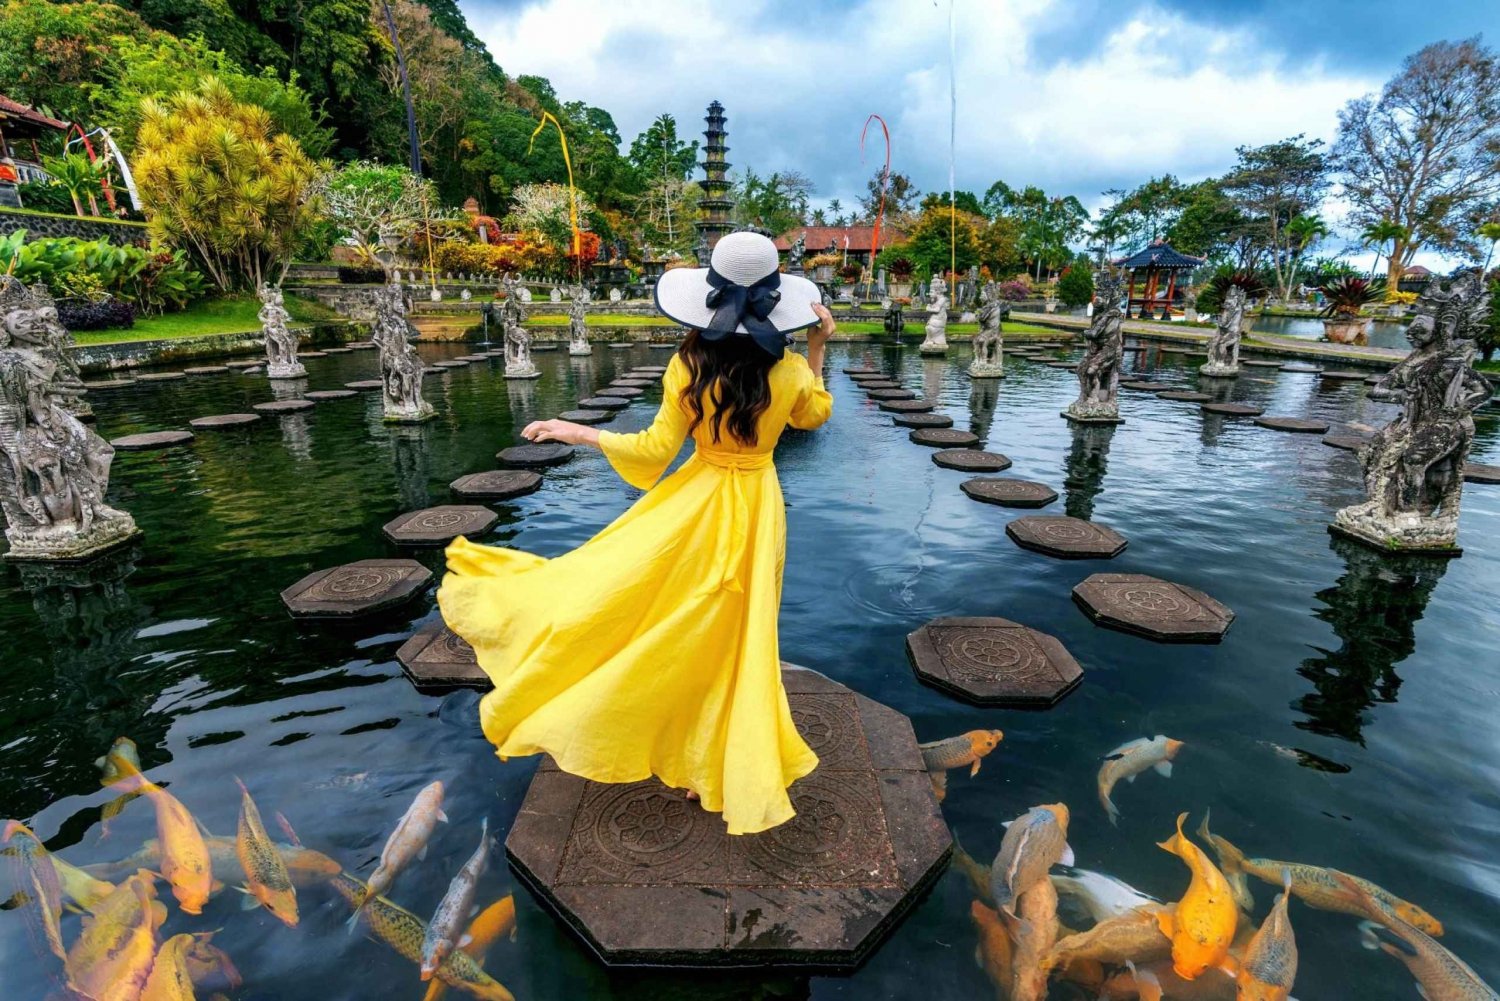 East Bali: Temples, Springs and Beaches